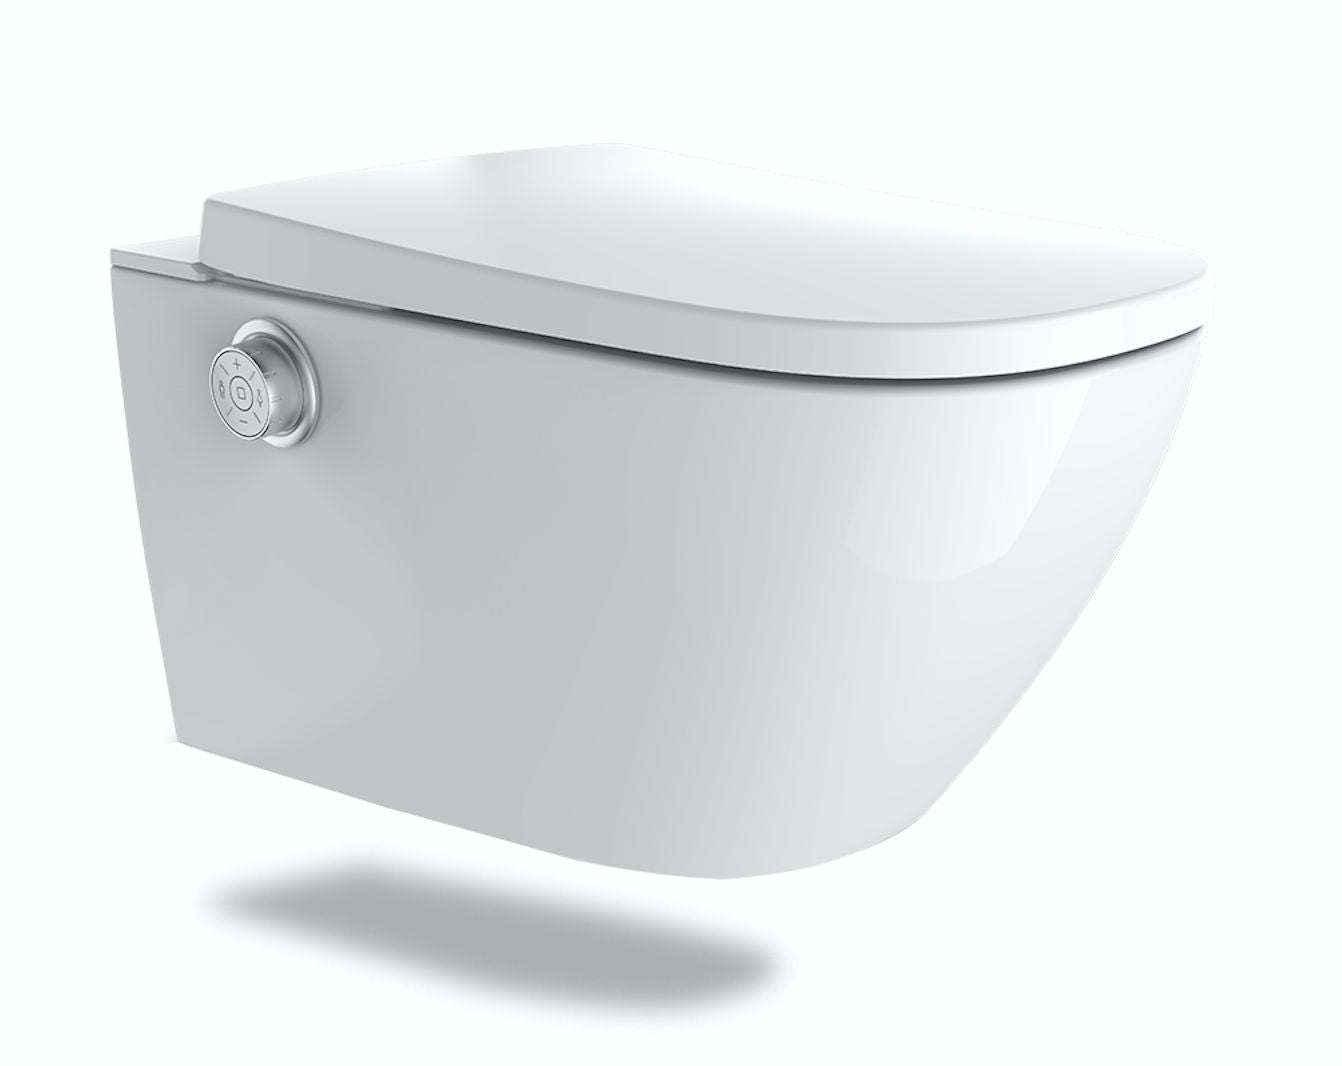 GALLARIA LENZA COMFORT RIMLESS WALL HUNG PAN AND REMOTE WASHLET PACKAGE GLOSS WHITE